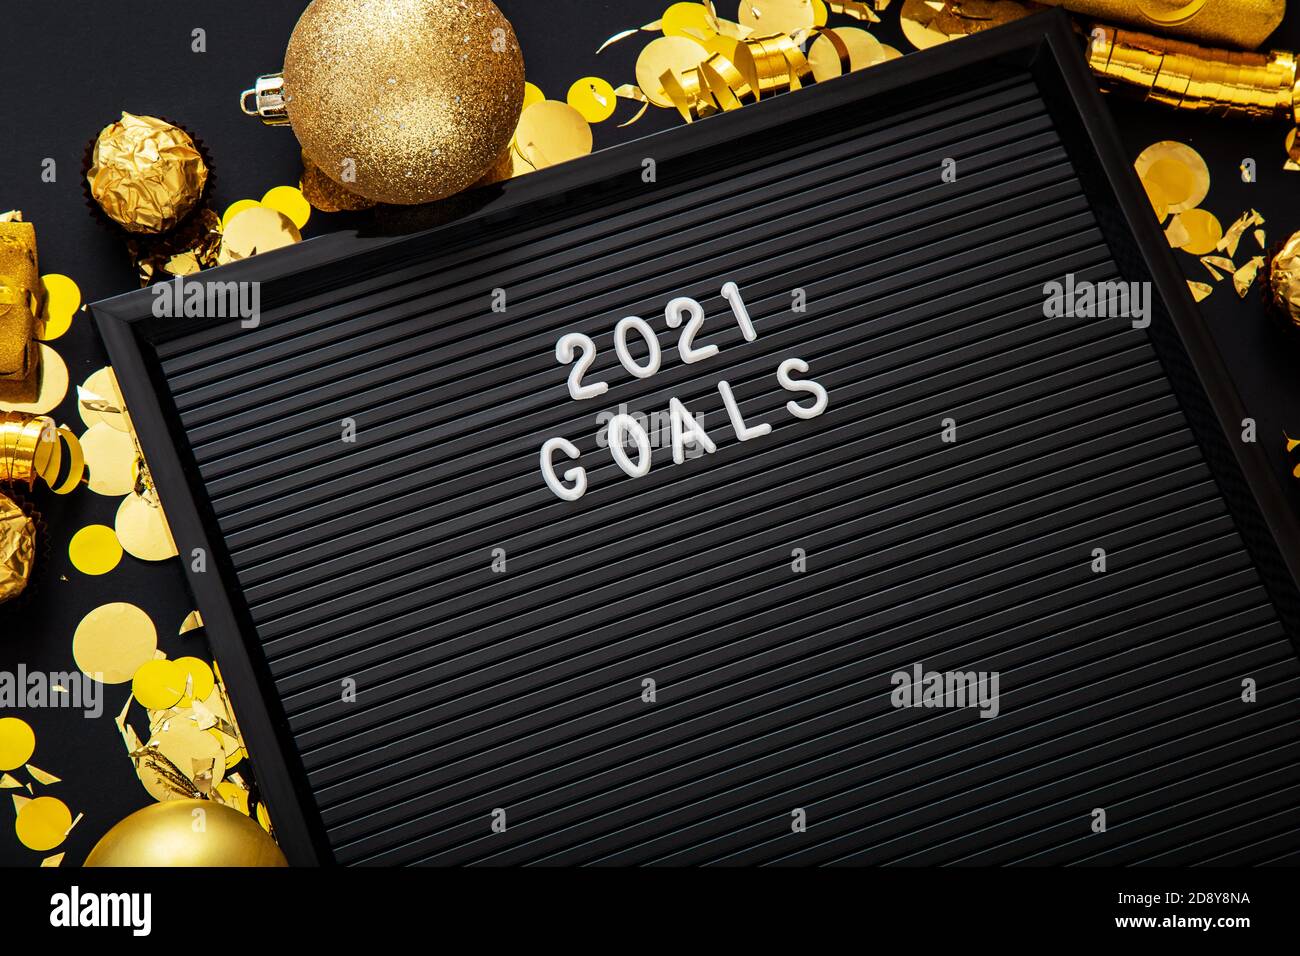 2021 Goals text on black Letter Board in Christmas festive decor, confetti balls. New year 2021 goals, resolution, check list with motivation or Stock Photo